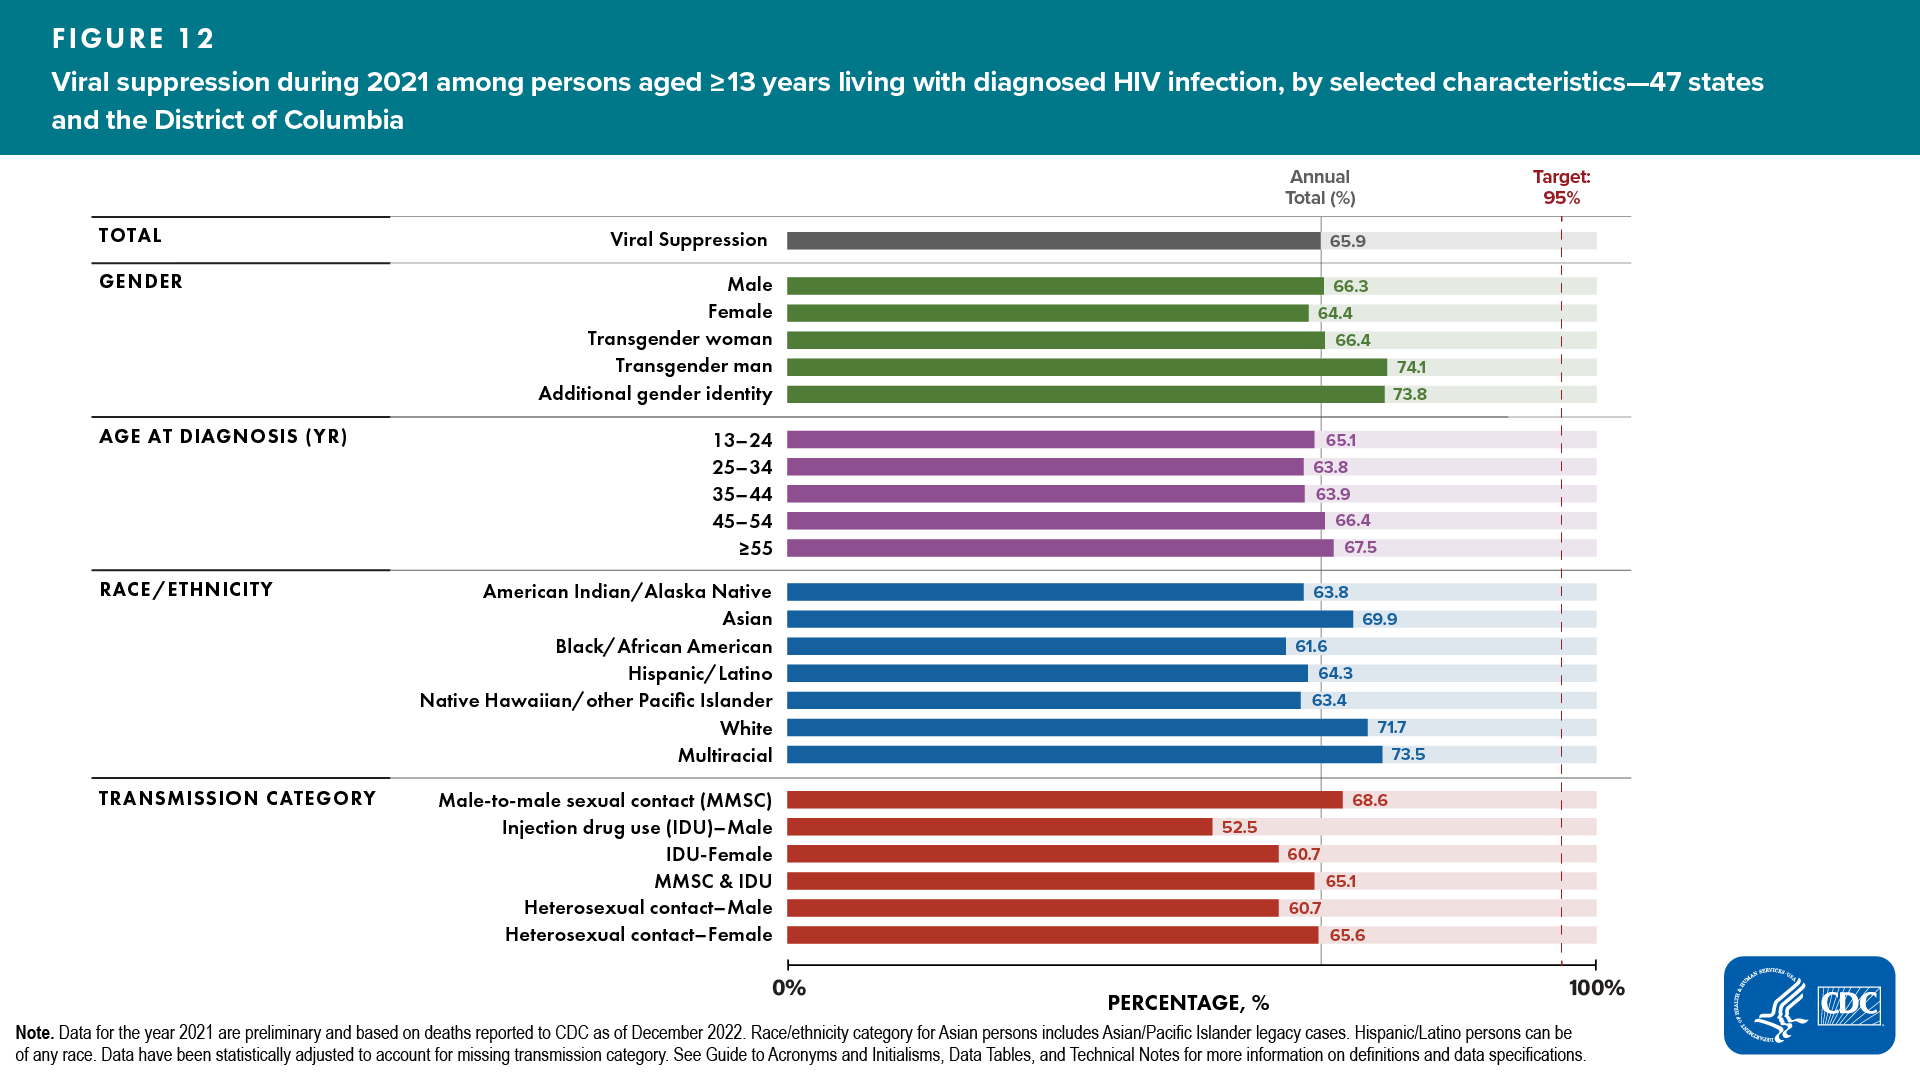 Figure 12. Viral suppression during 2021 among persons aged ≥13 years living with diagnosed HIV infection, by selected characteristics — 47 states and the District of Columbia